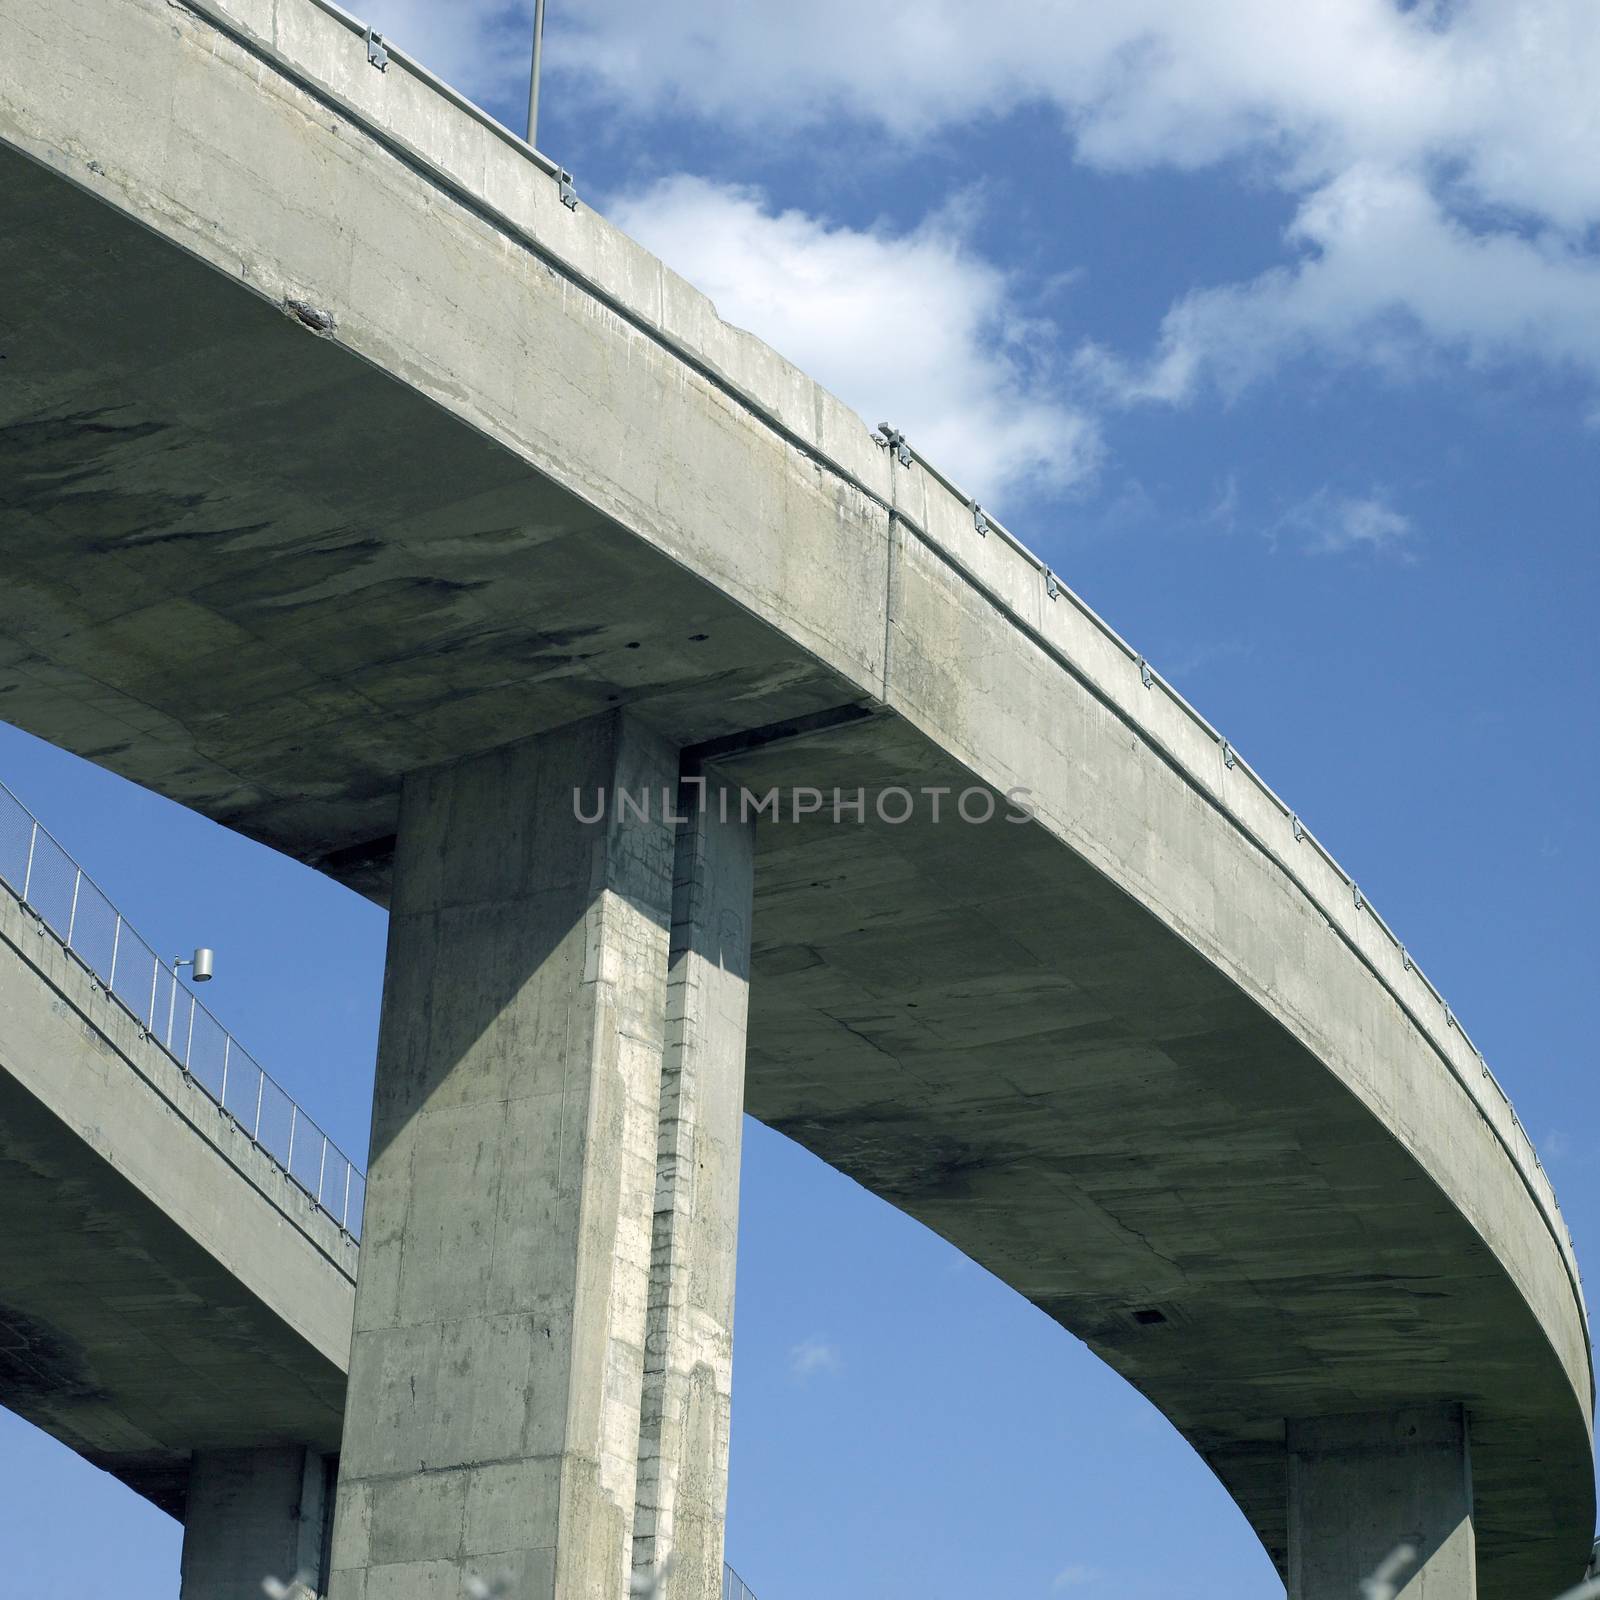 Concrete Highway Viaducts by mmm